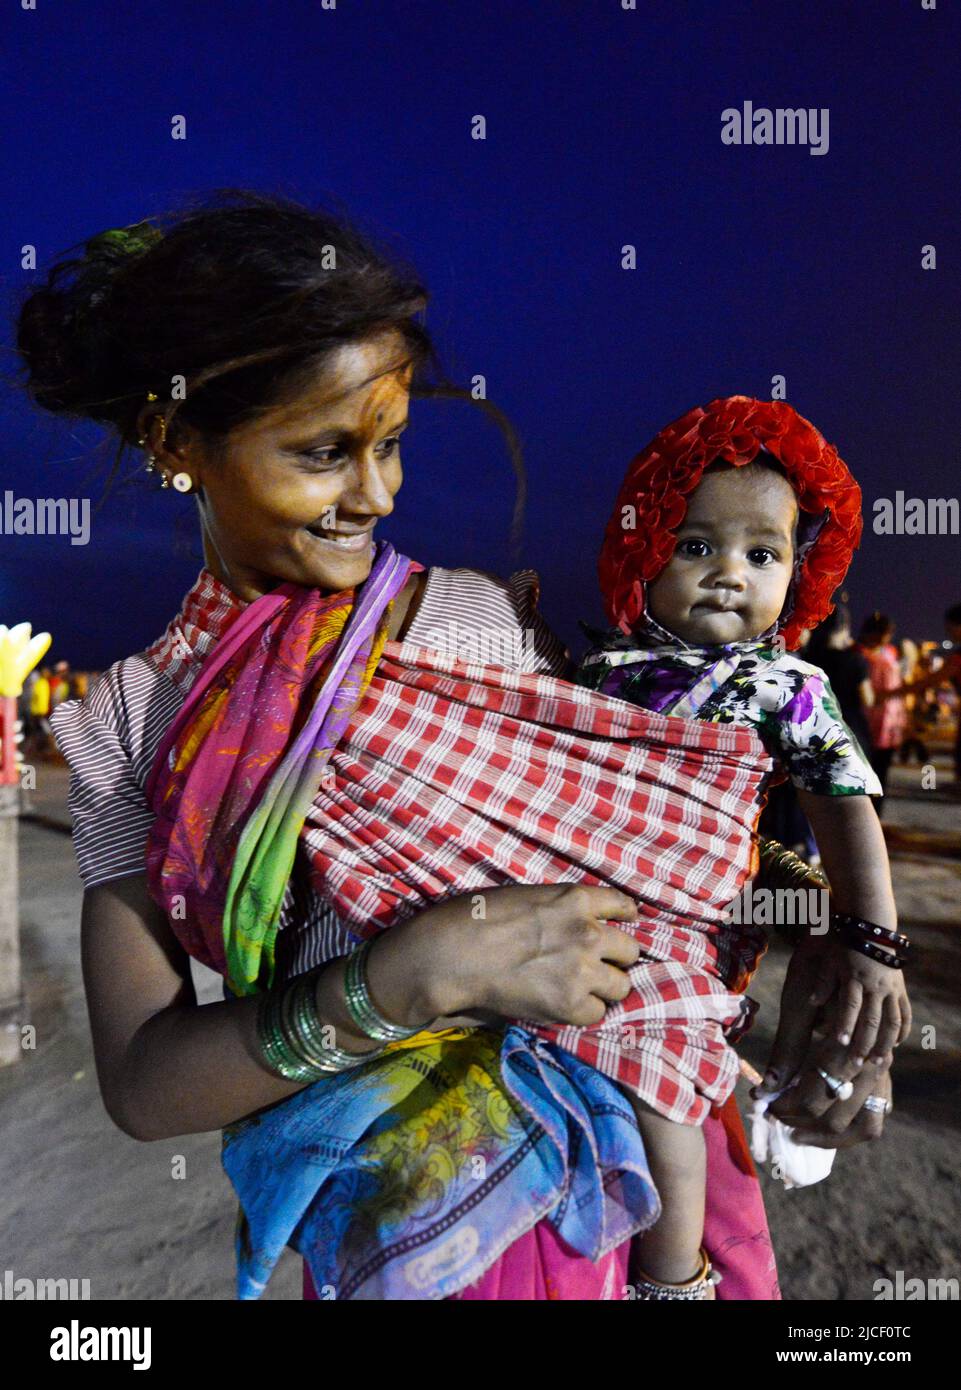 Mother's love. Ann Indian woman beggar with her baby in Juhu beach, Mumbai, India. Stock Photo